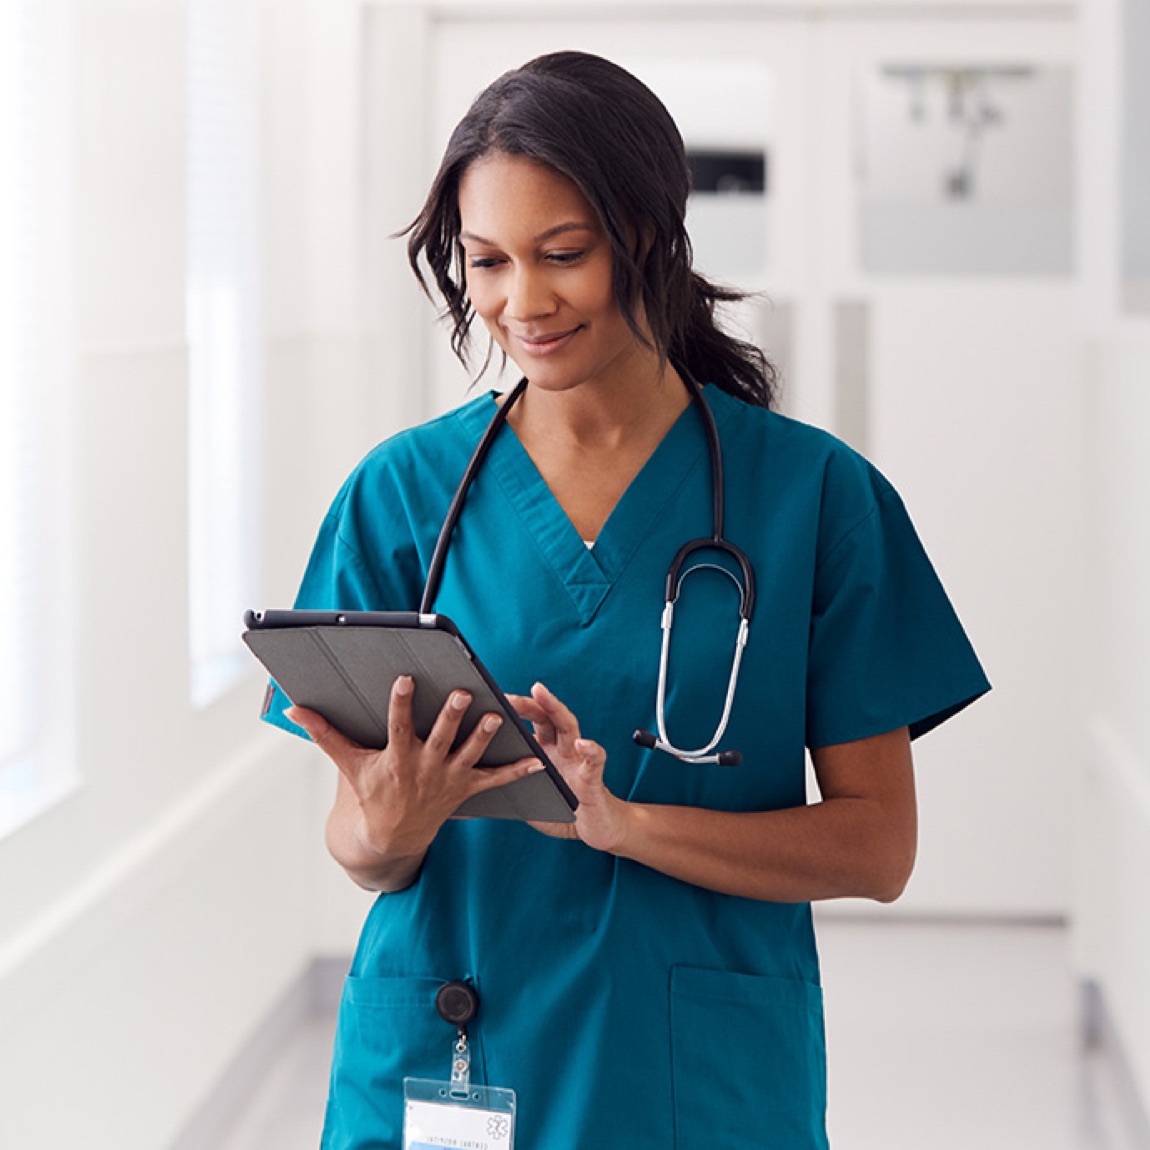 A female nurse viewing information on a tablet.